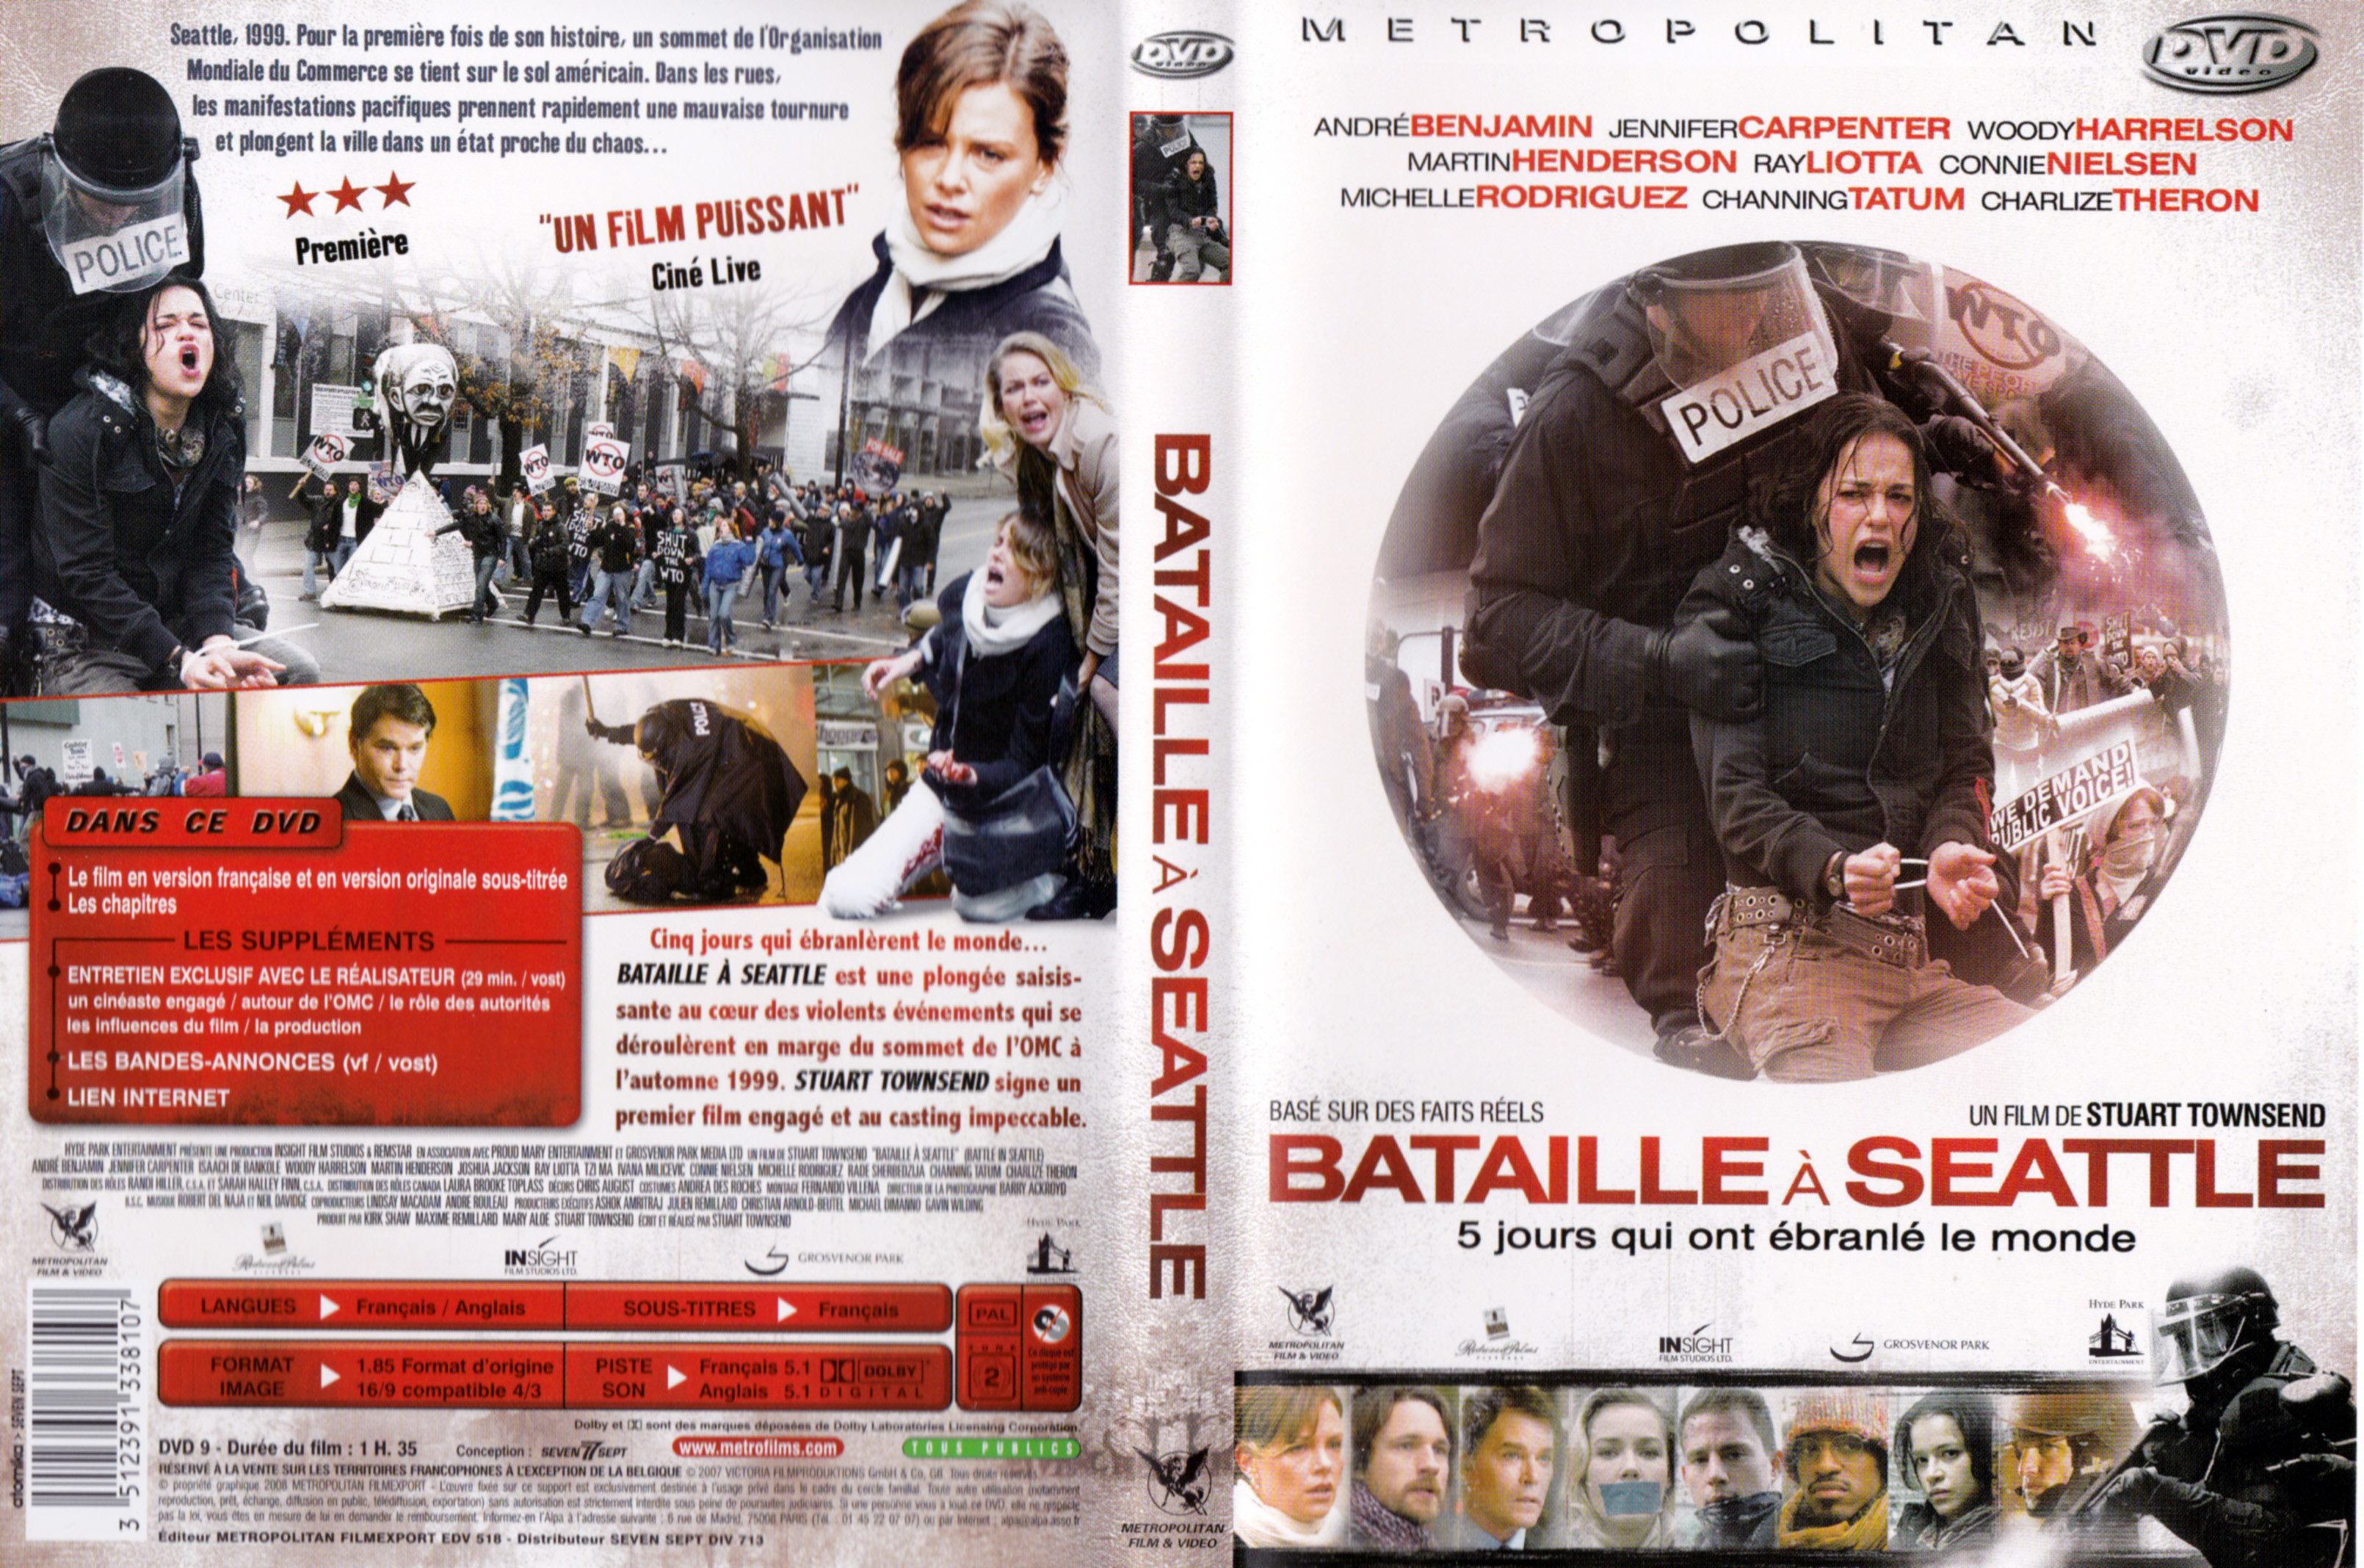 Jaquette DVD Bataille  Seattle v2